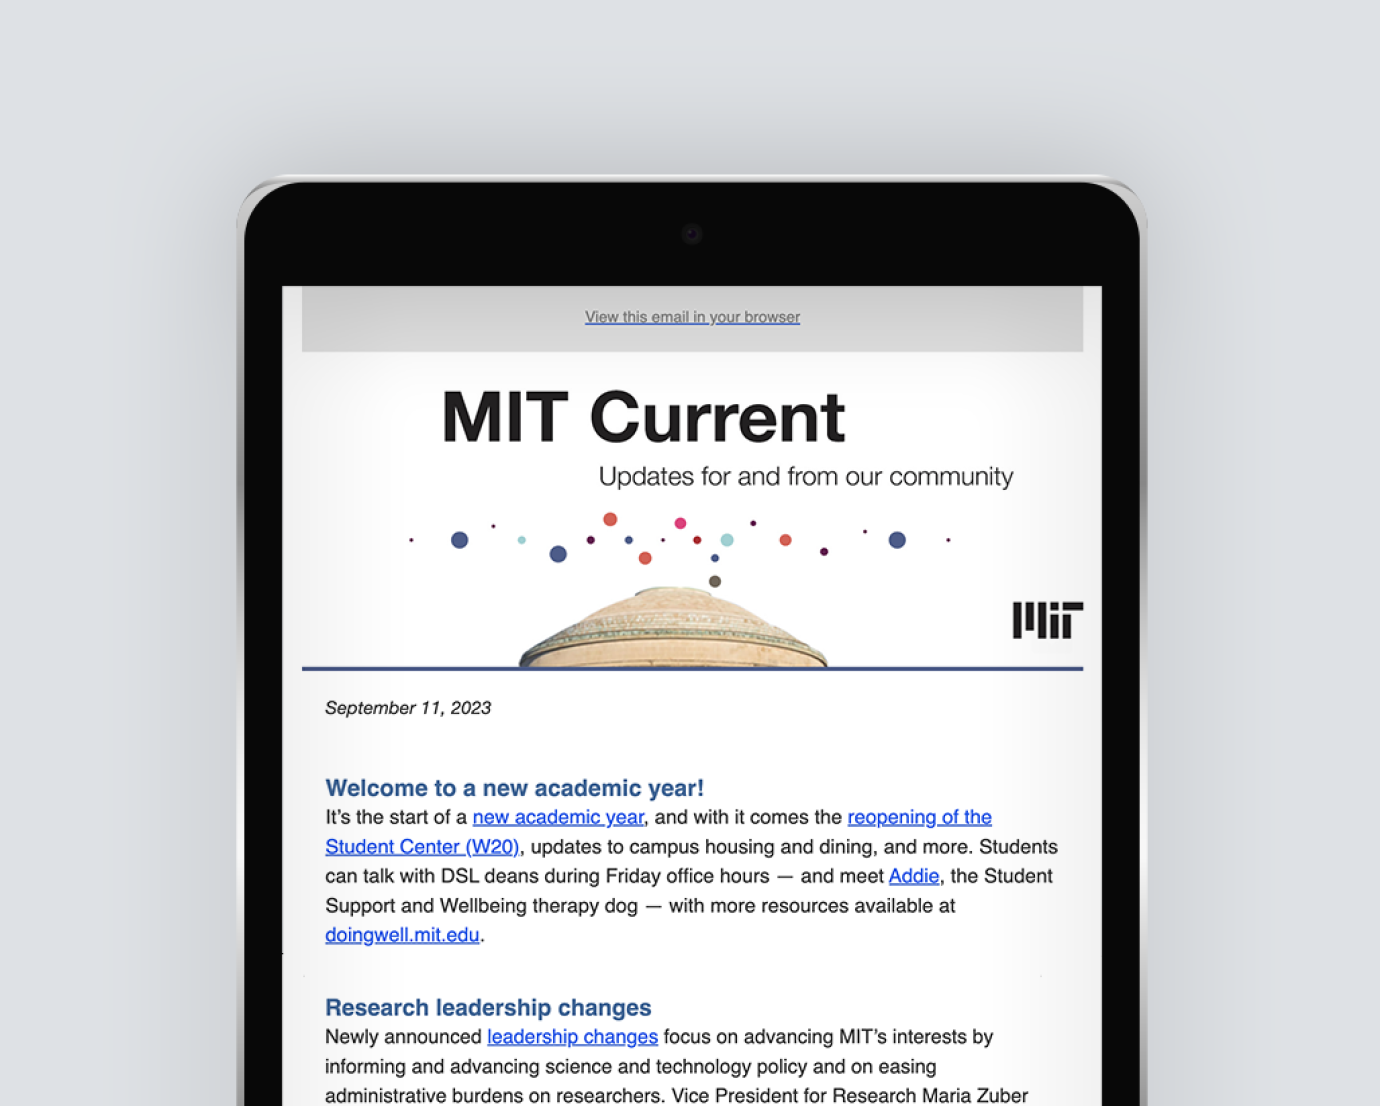 HTML email for the MIT Current. The header area says "Updates for and from our community" and shows the MIT Dome with colored circles above it. The MIT logo is to the side.